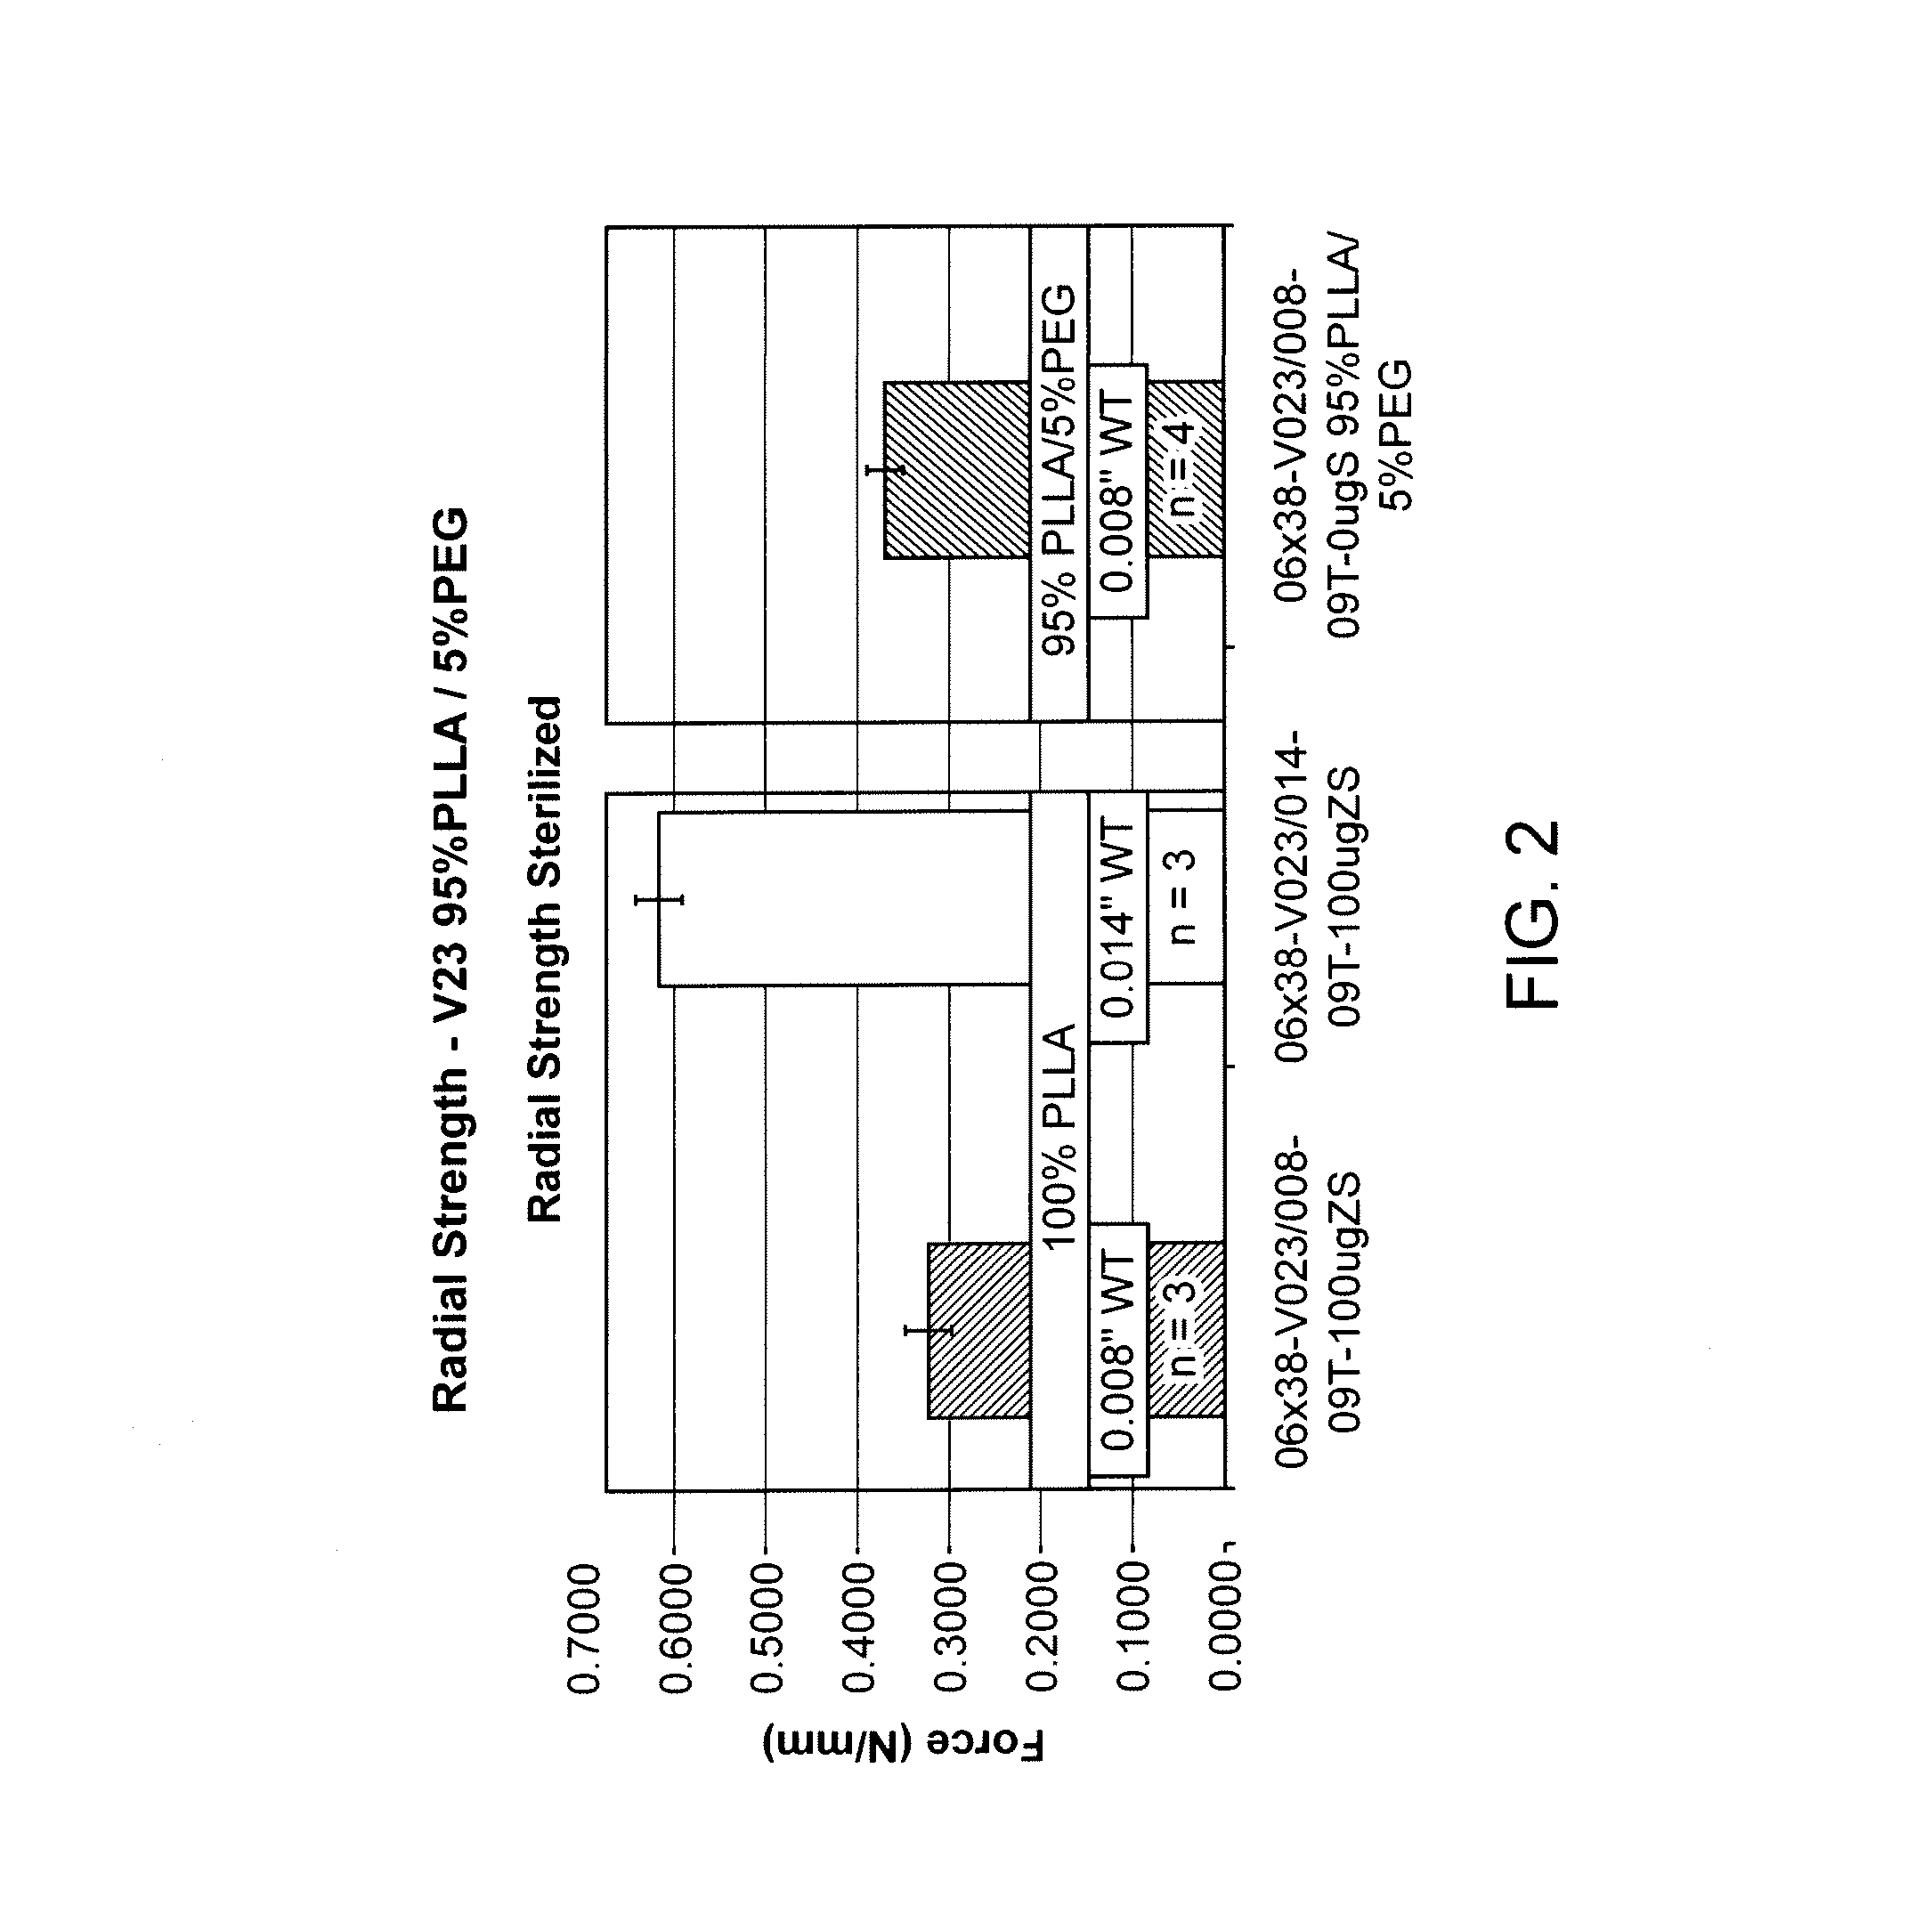 Rubber toughened bioresorbable polymer peripheral scaffolds